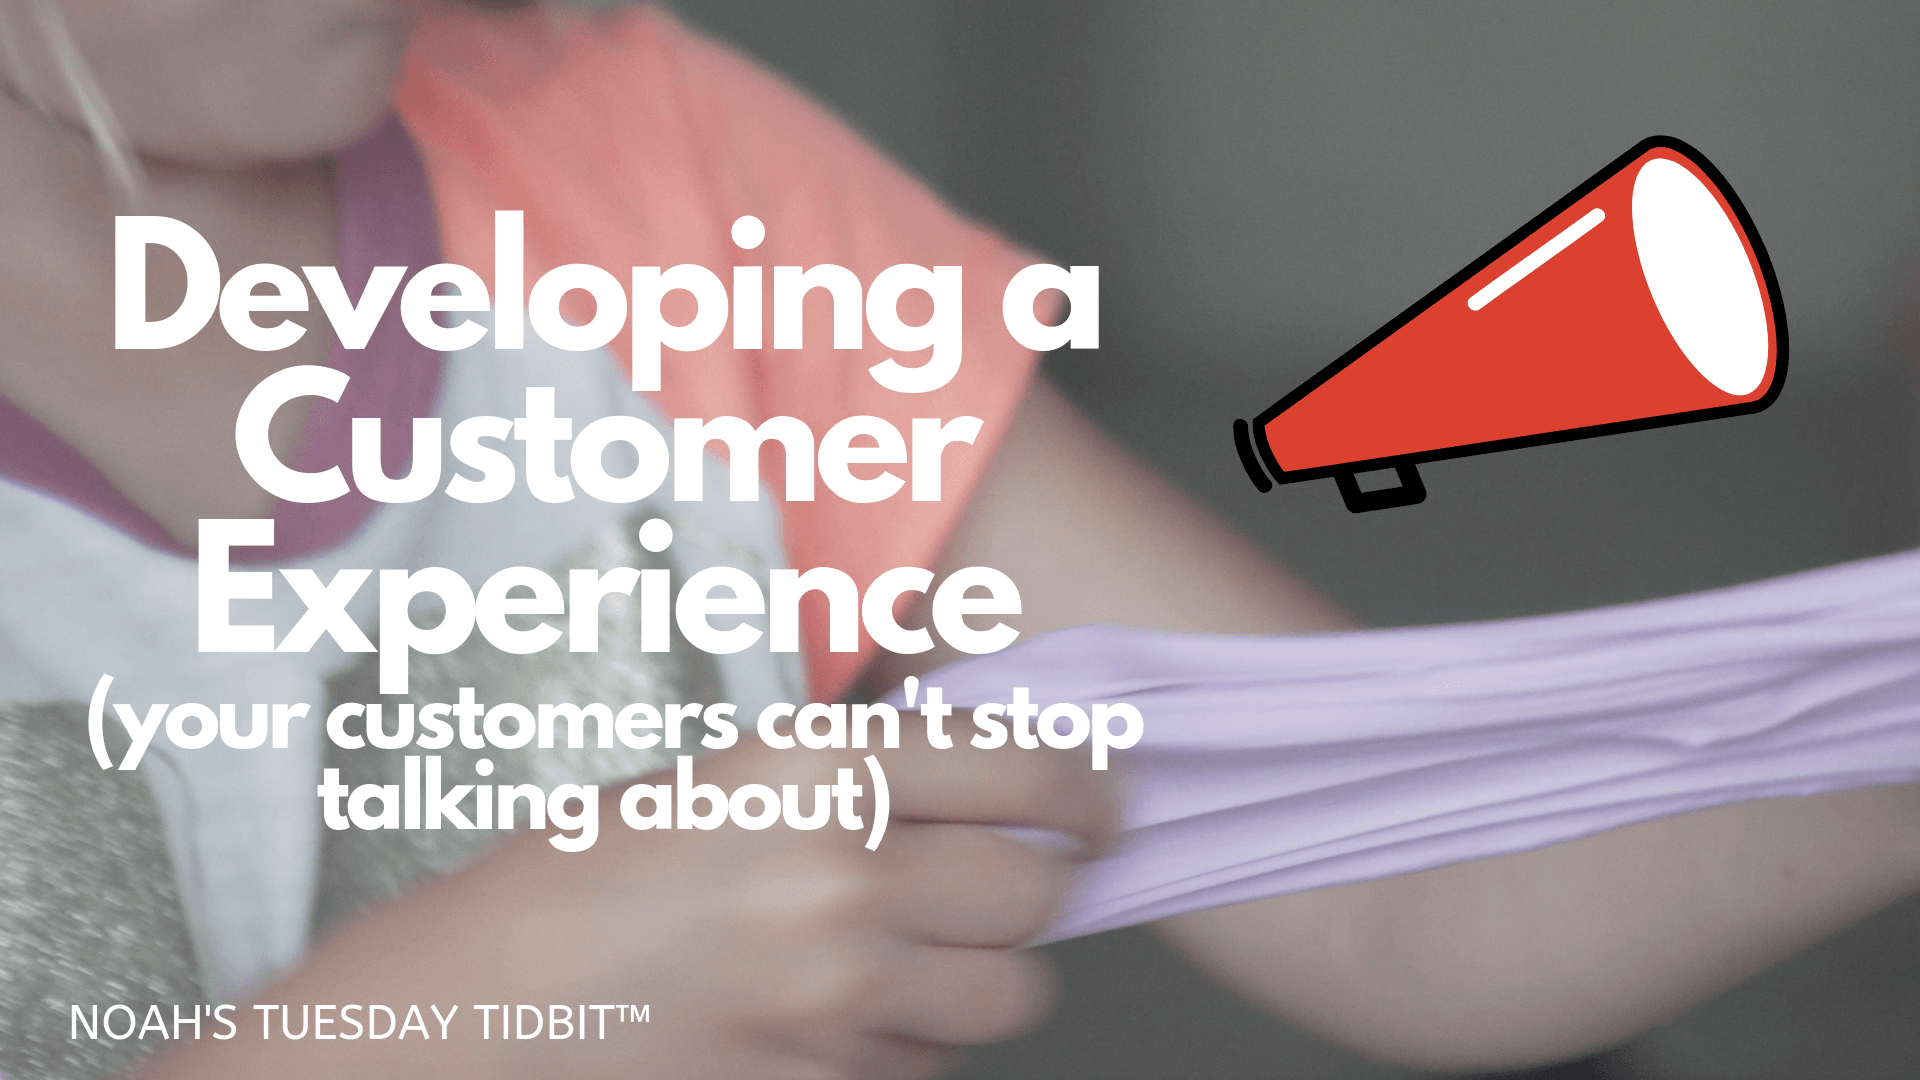 How to Create an Experience Your Customers Can't Stop Talking About